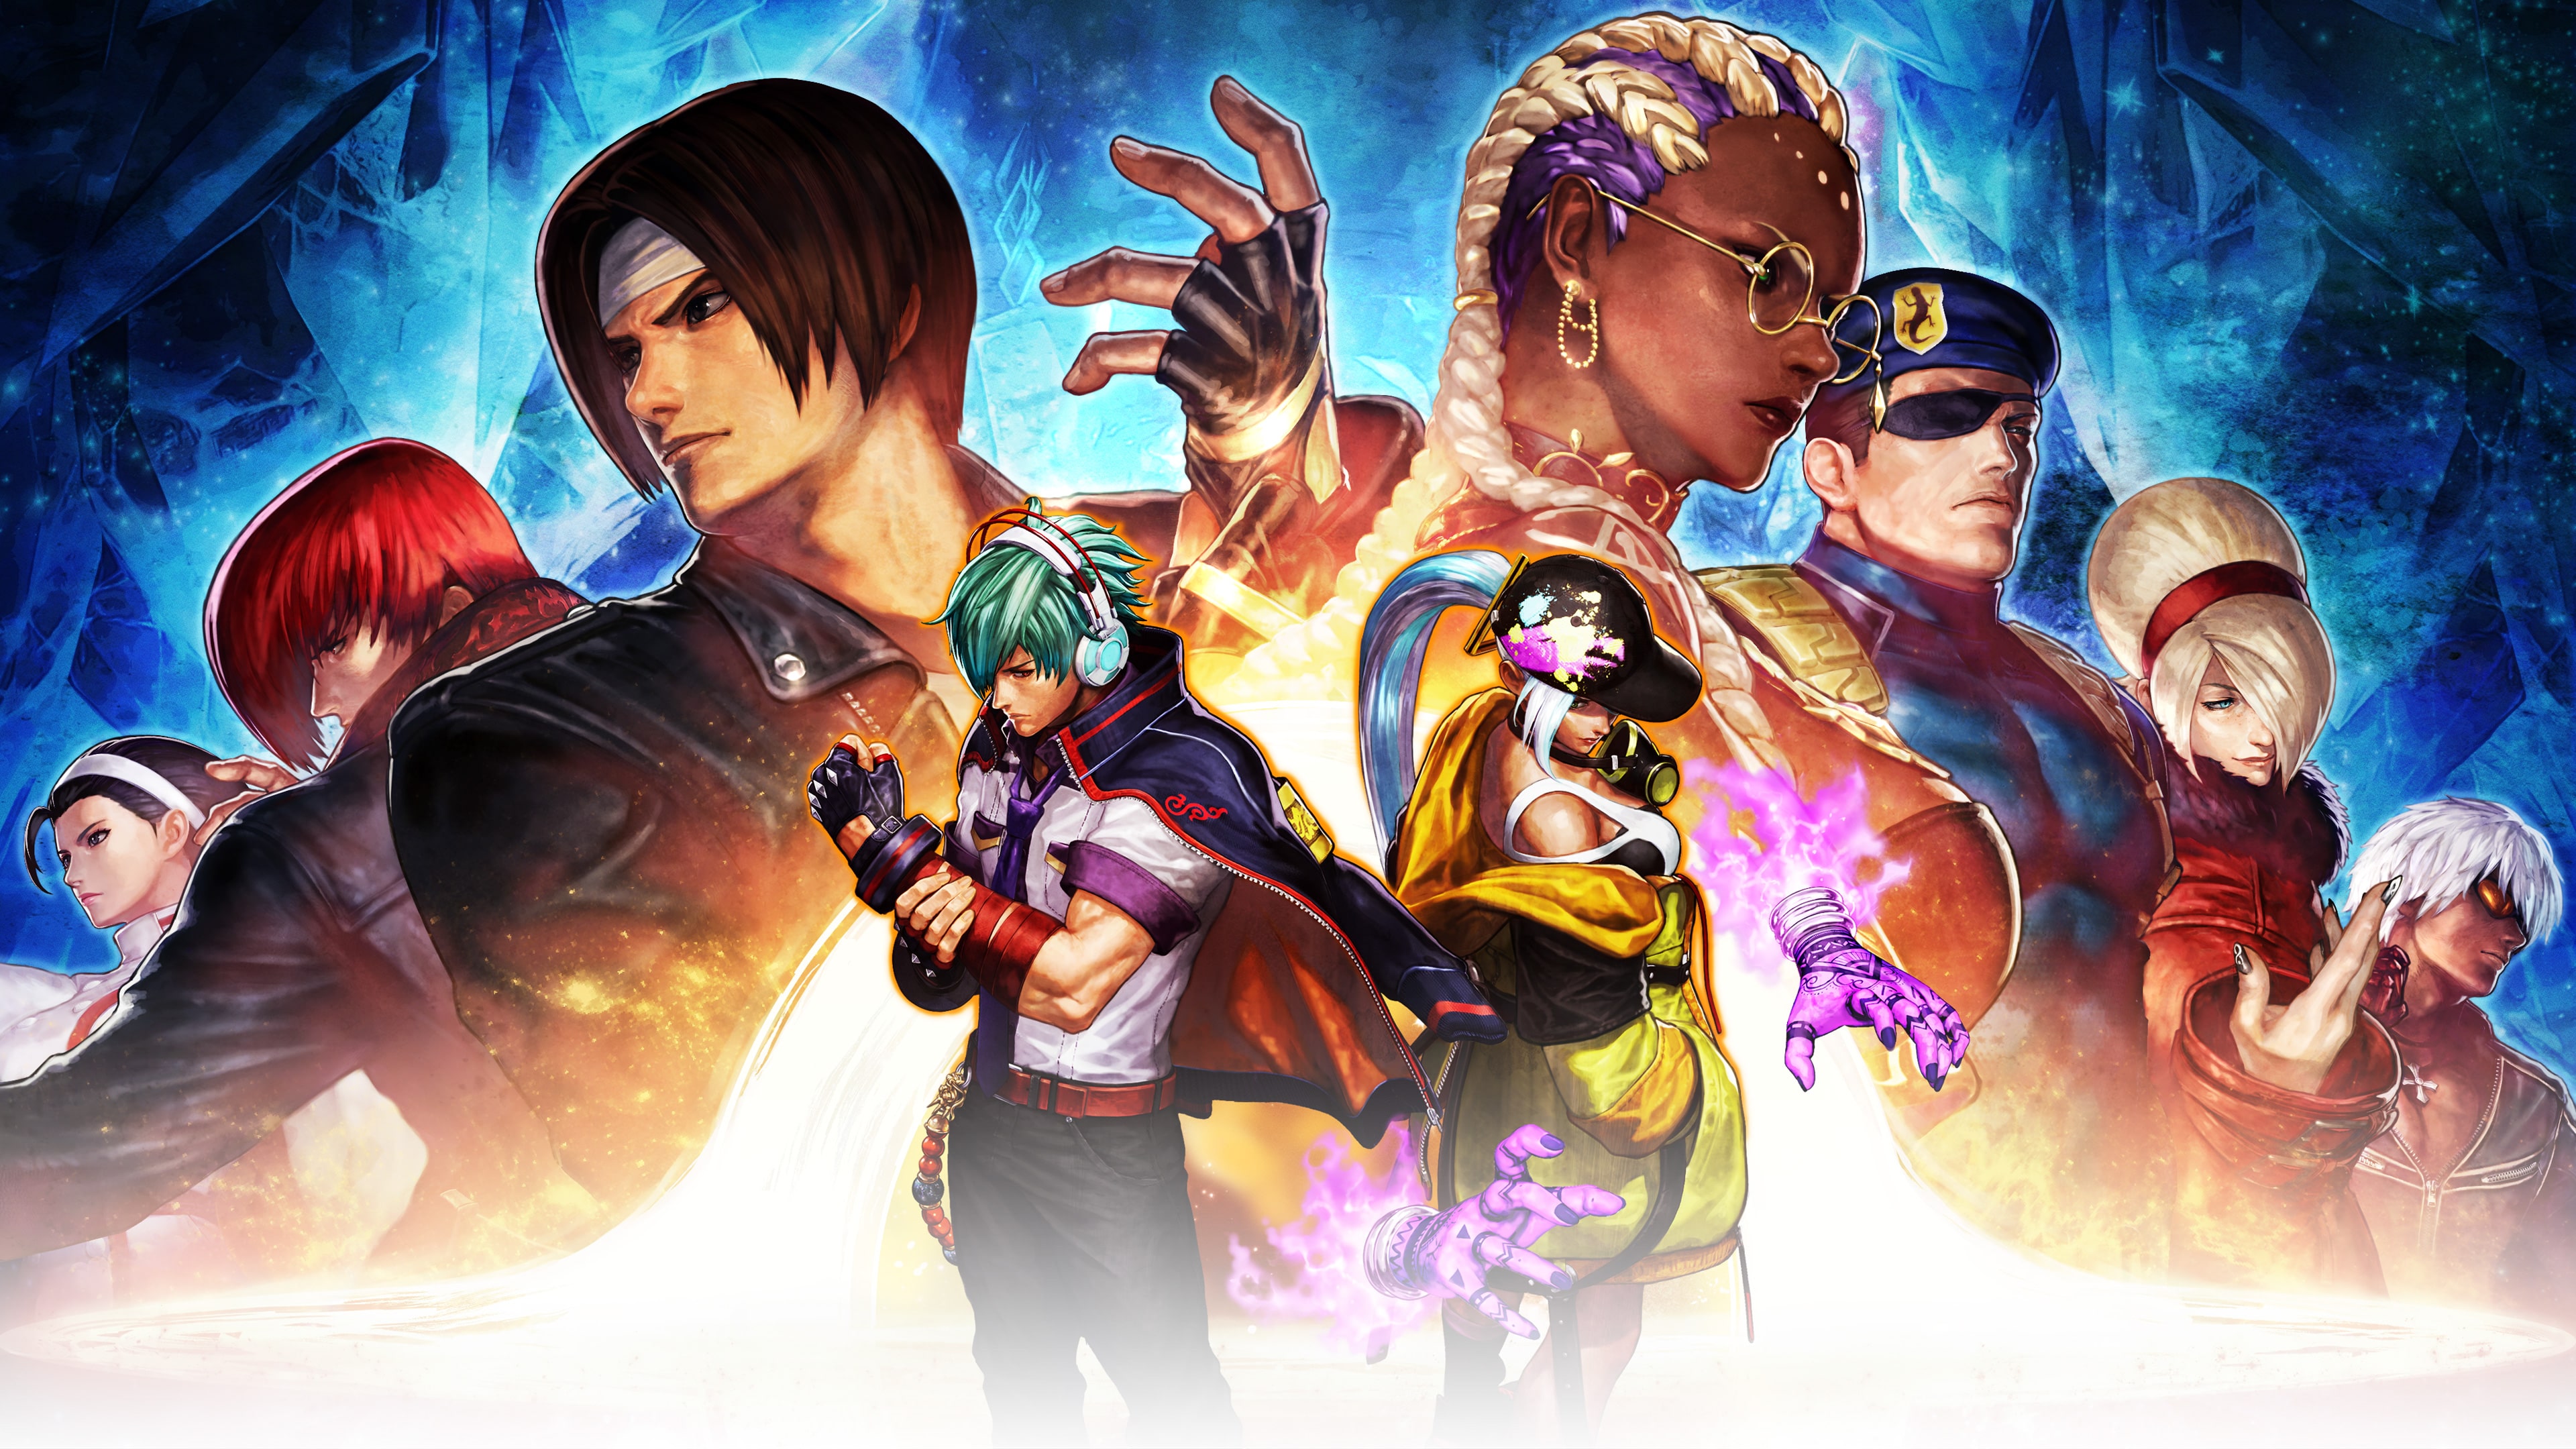 THE KING OF FIGHTERS XV DEMO (Simplified Chinese, English, Korean, Thai, Japanese, Traditional Chinese)